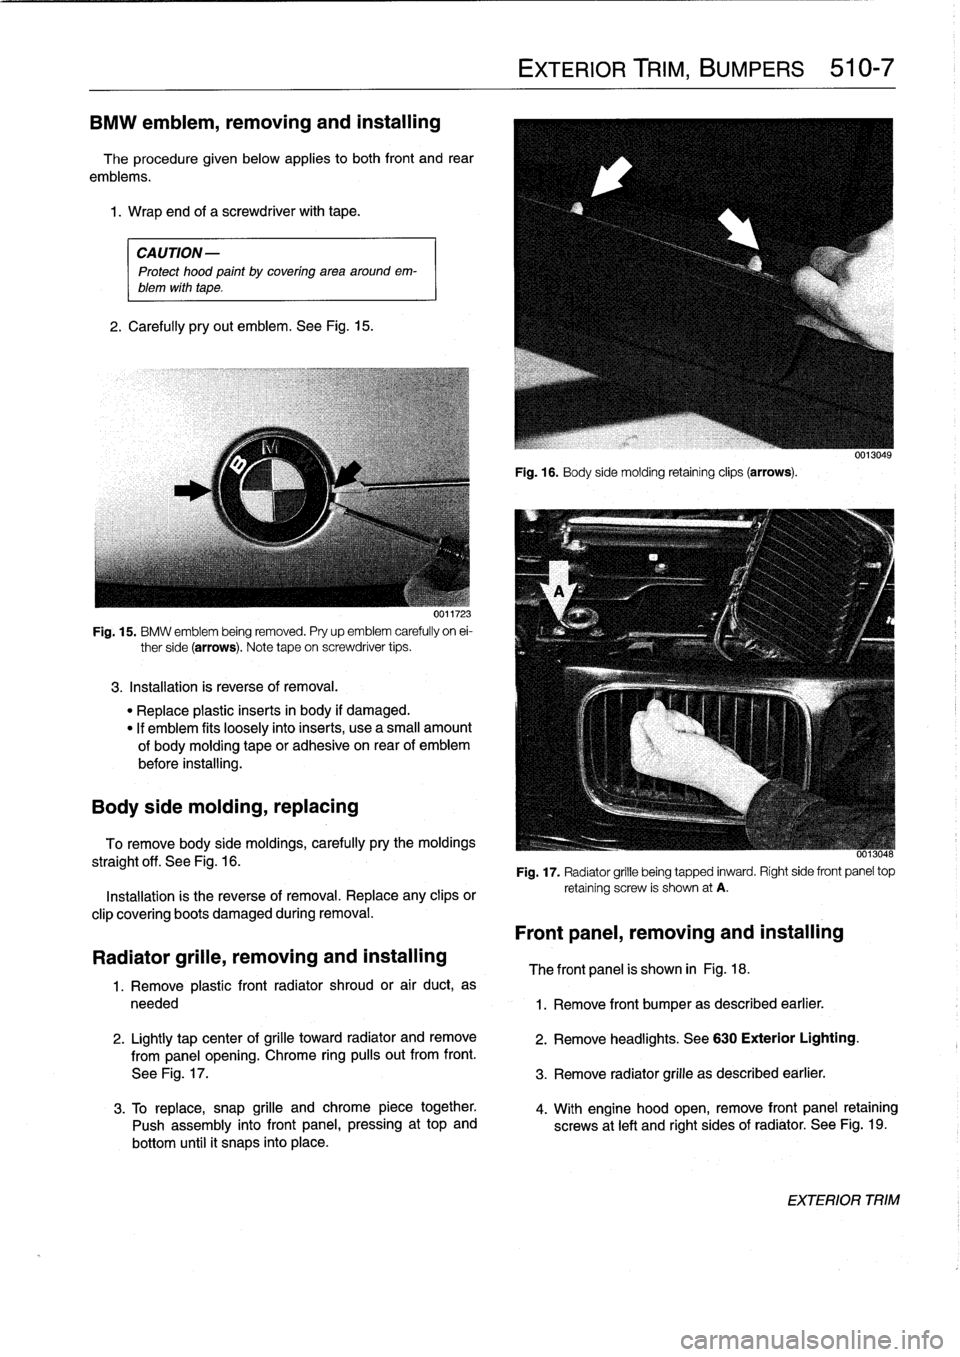 BMW 318i 1996 E36 Workshop Manual 
BMW
emblem,
removing
and
installing

The
procedure
given
below
applies
to
both
front
and
rear

emblems
.

1
.
Wrap
and
of
a
screwdriver
with
tape
.

CAUTION-

Protect
hood
paint
by
coveringarea
aroun